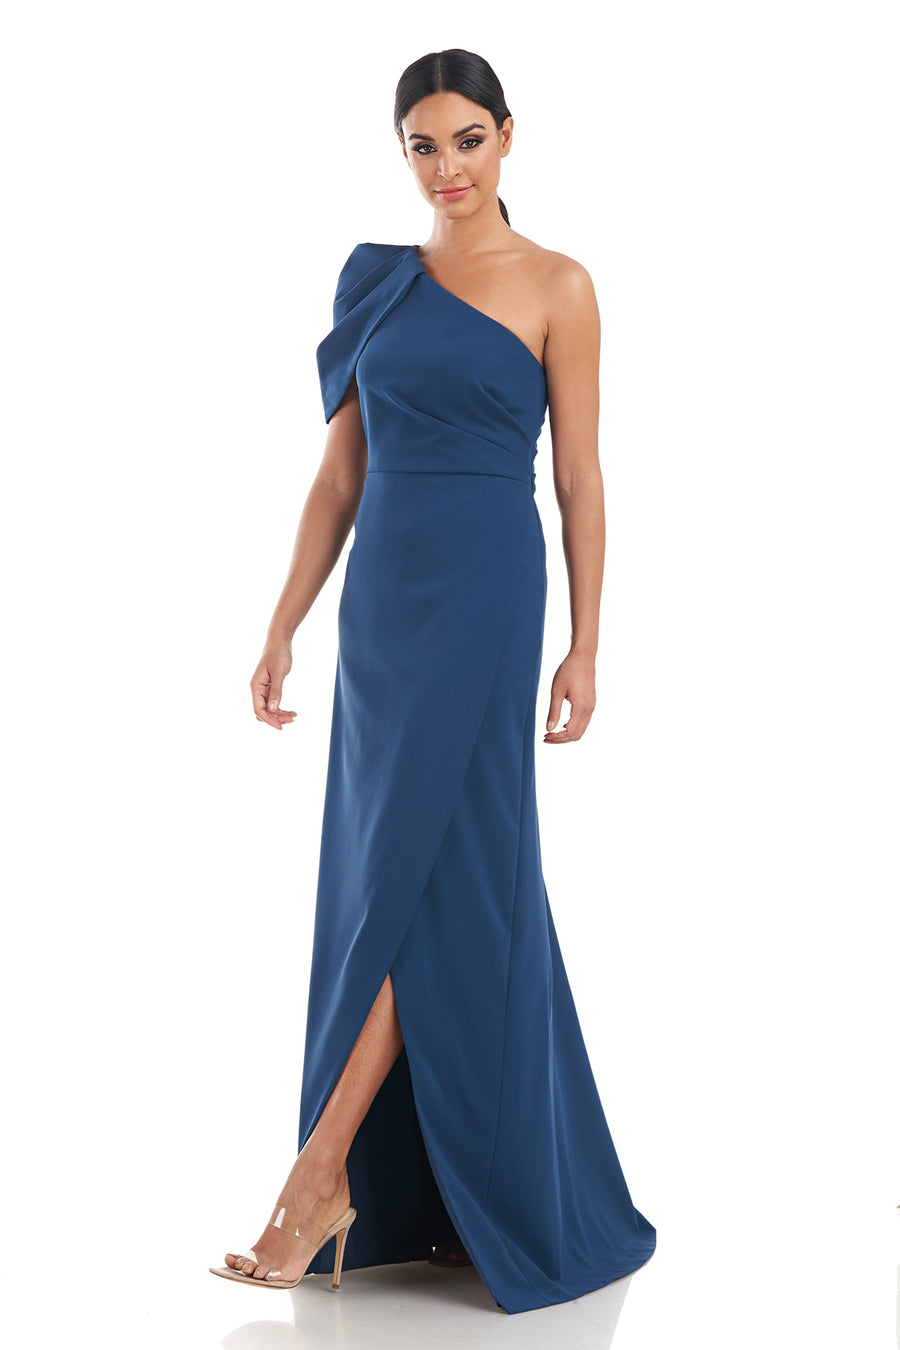 I Got You Gown: The Ultimate Statement of Elegance by Zhivago